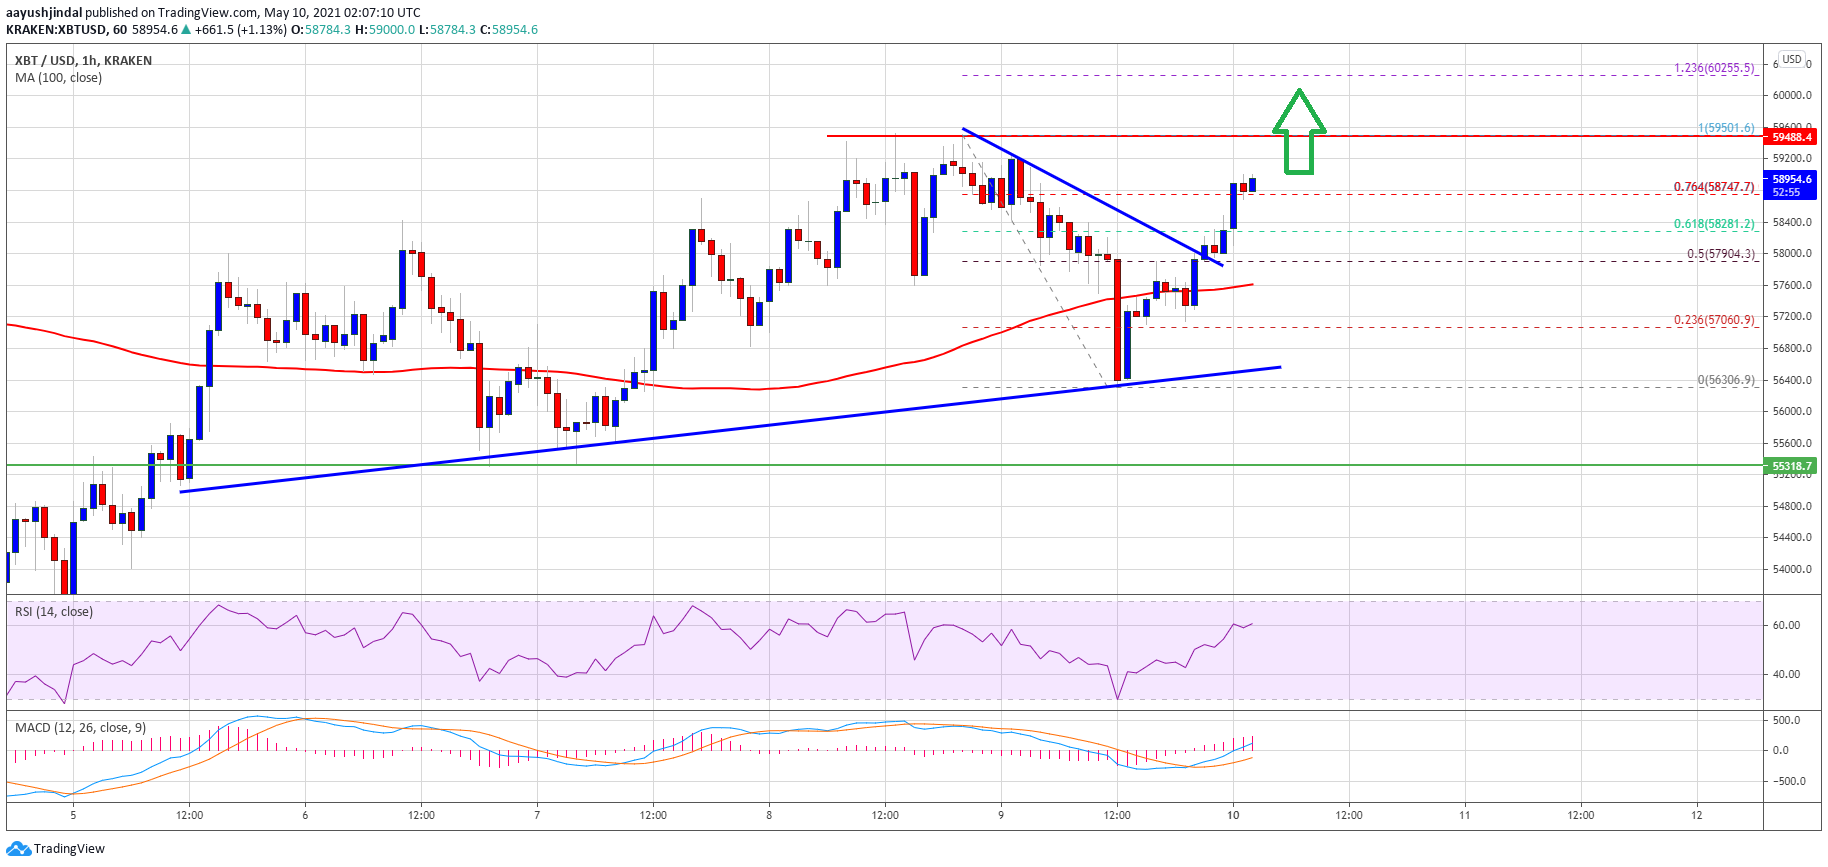 TA: Bitcoin Resumes Uptrend, Here’s Why BTC Could Rally Above $60K